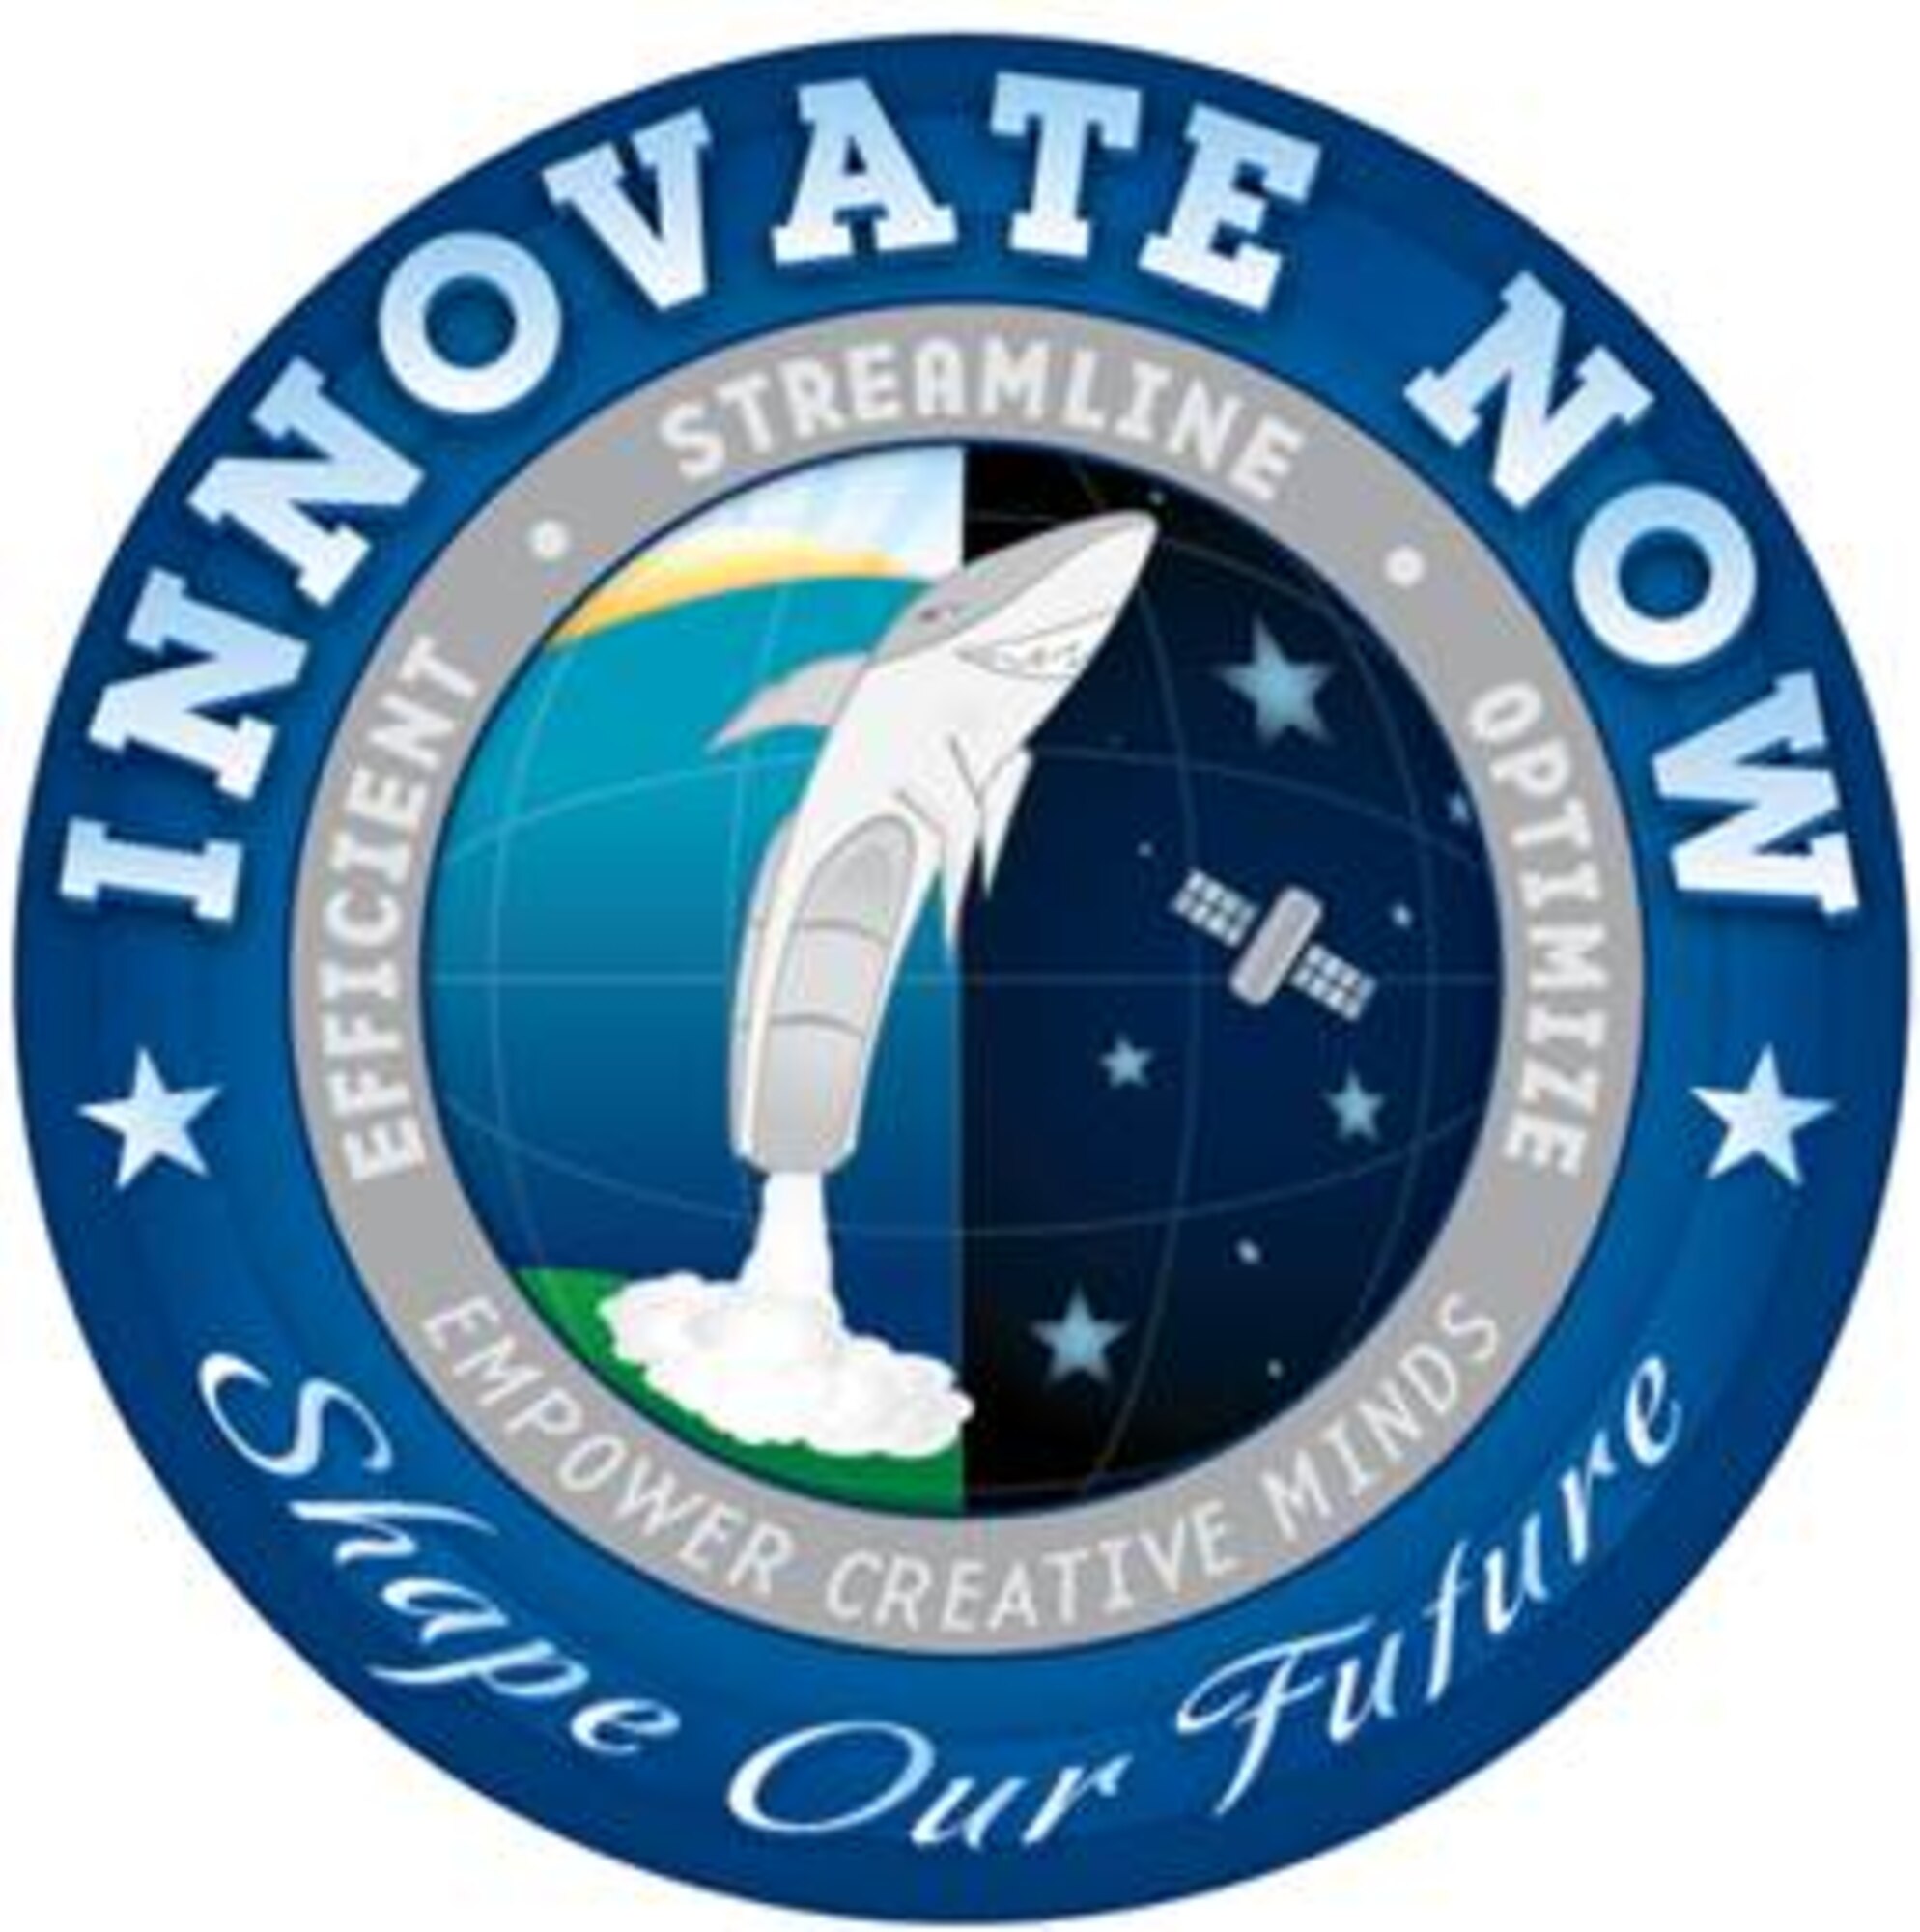 Innovate Now! (U.S. Air Force graphic/James Rainer)